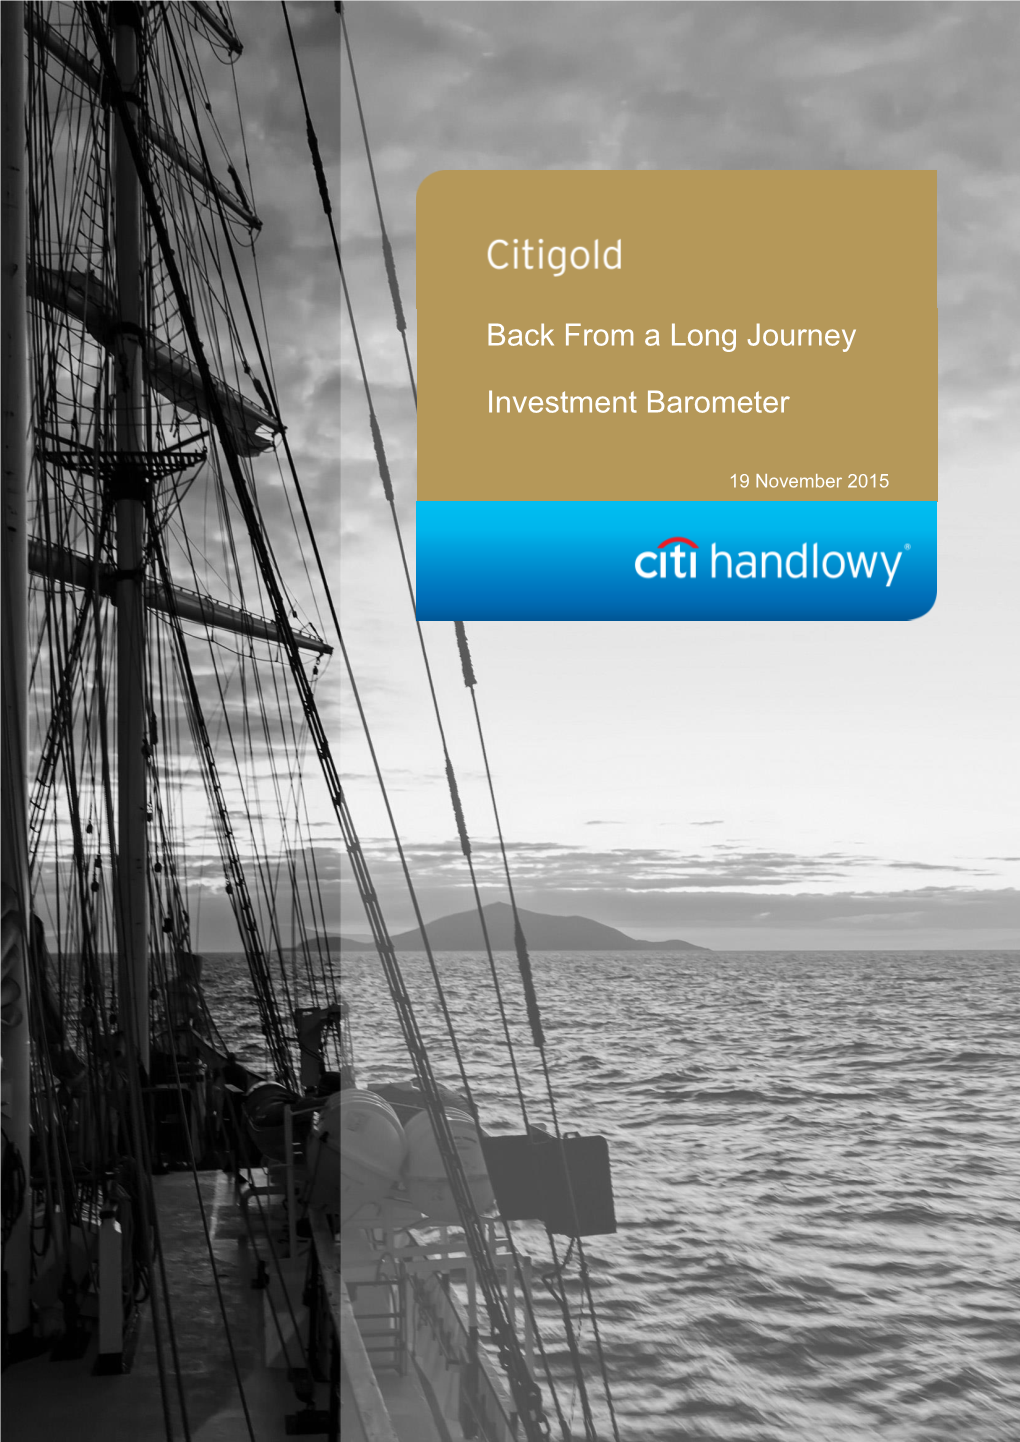 Back from a Long Journey Investment Barometer